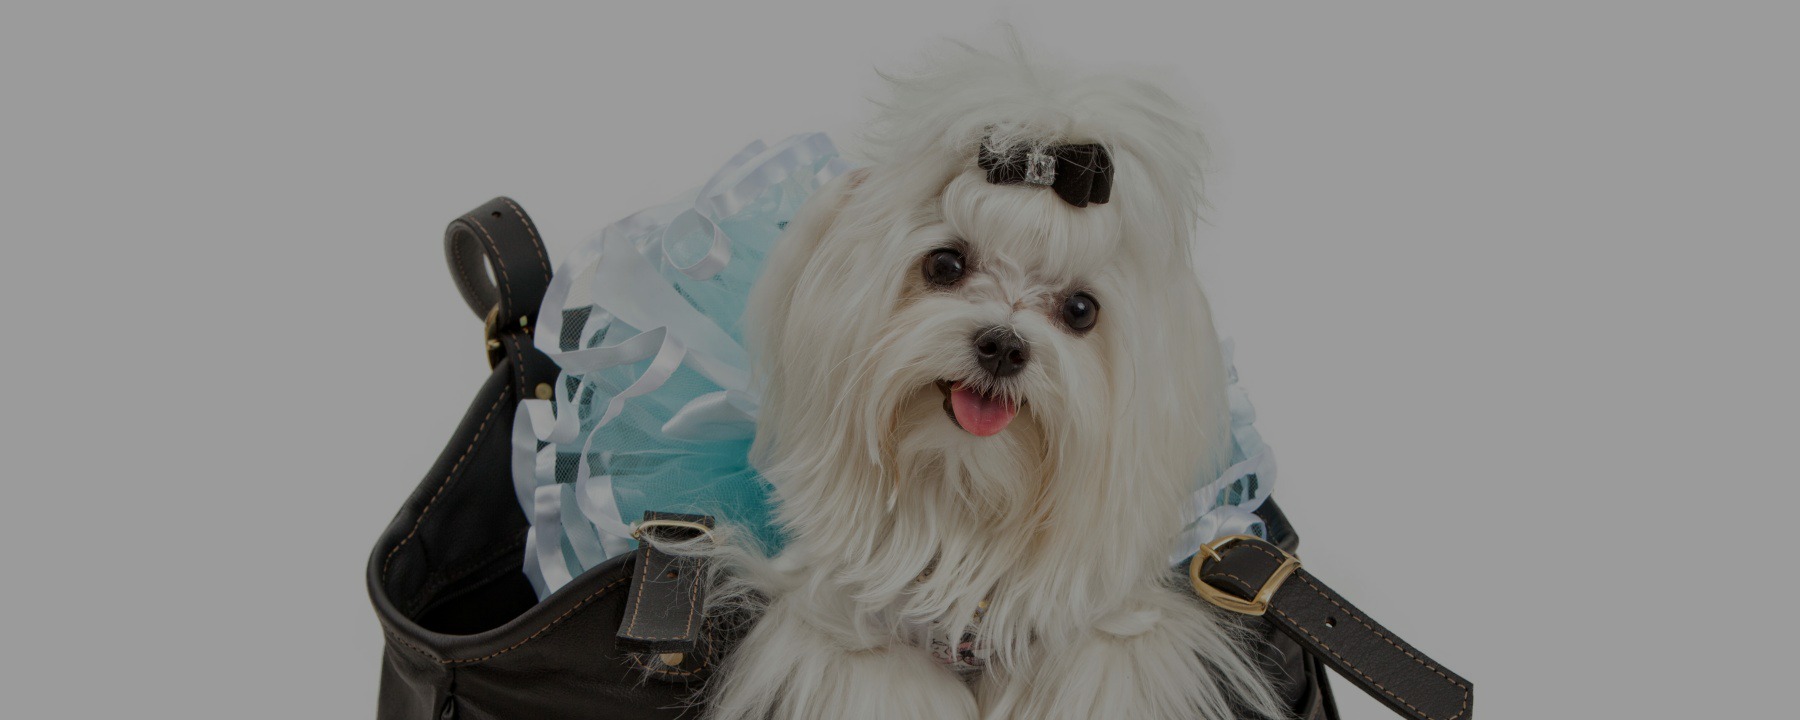 QUIZ: Do You Have What it Takes to Be a Dog Groomer?